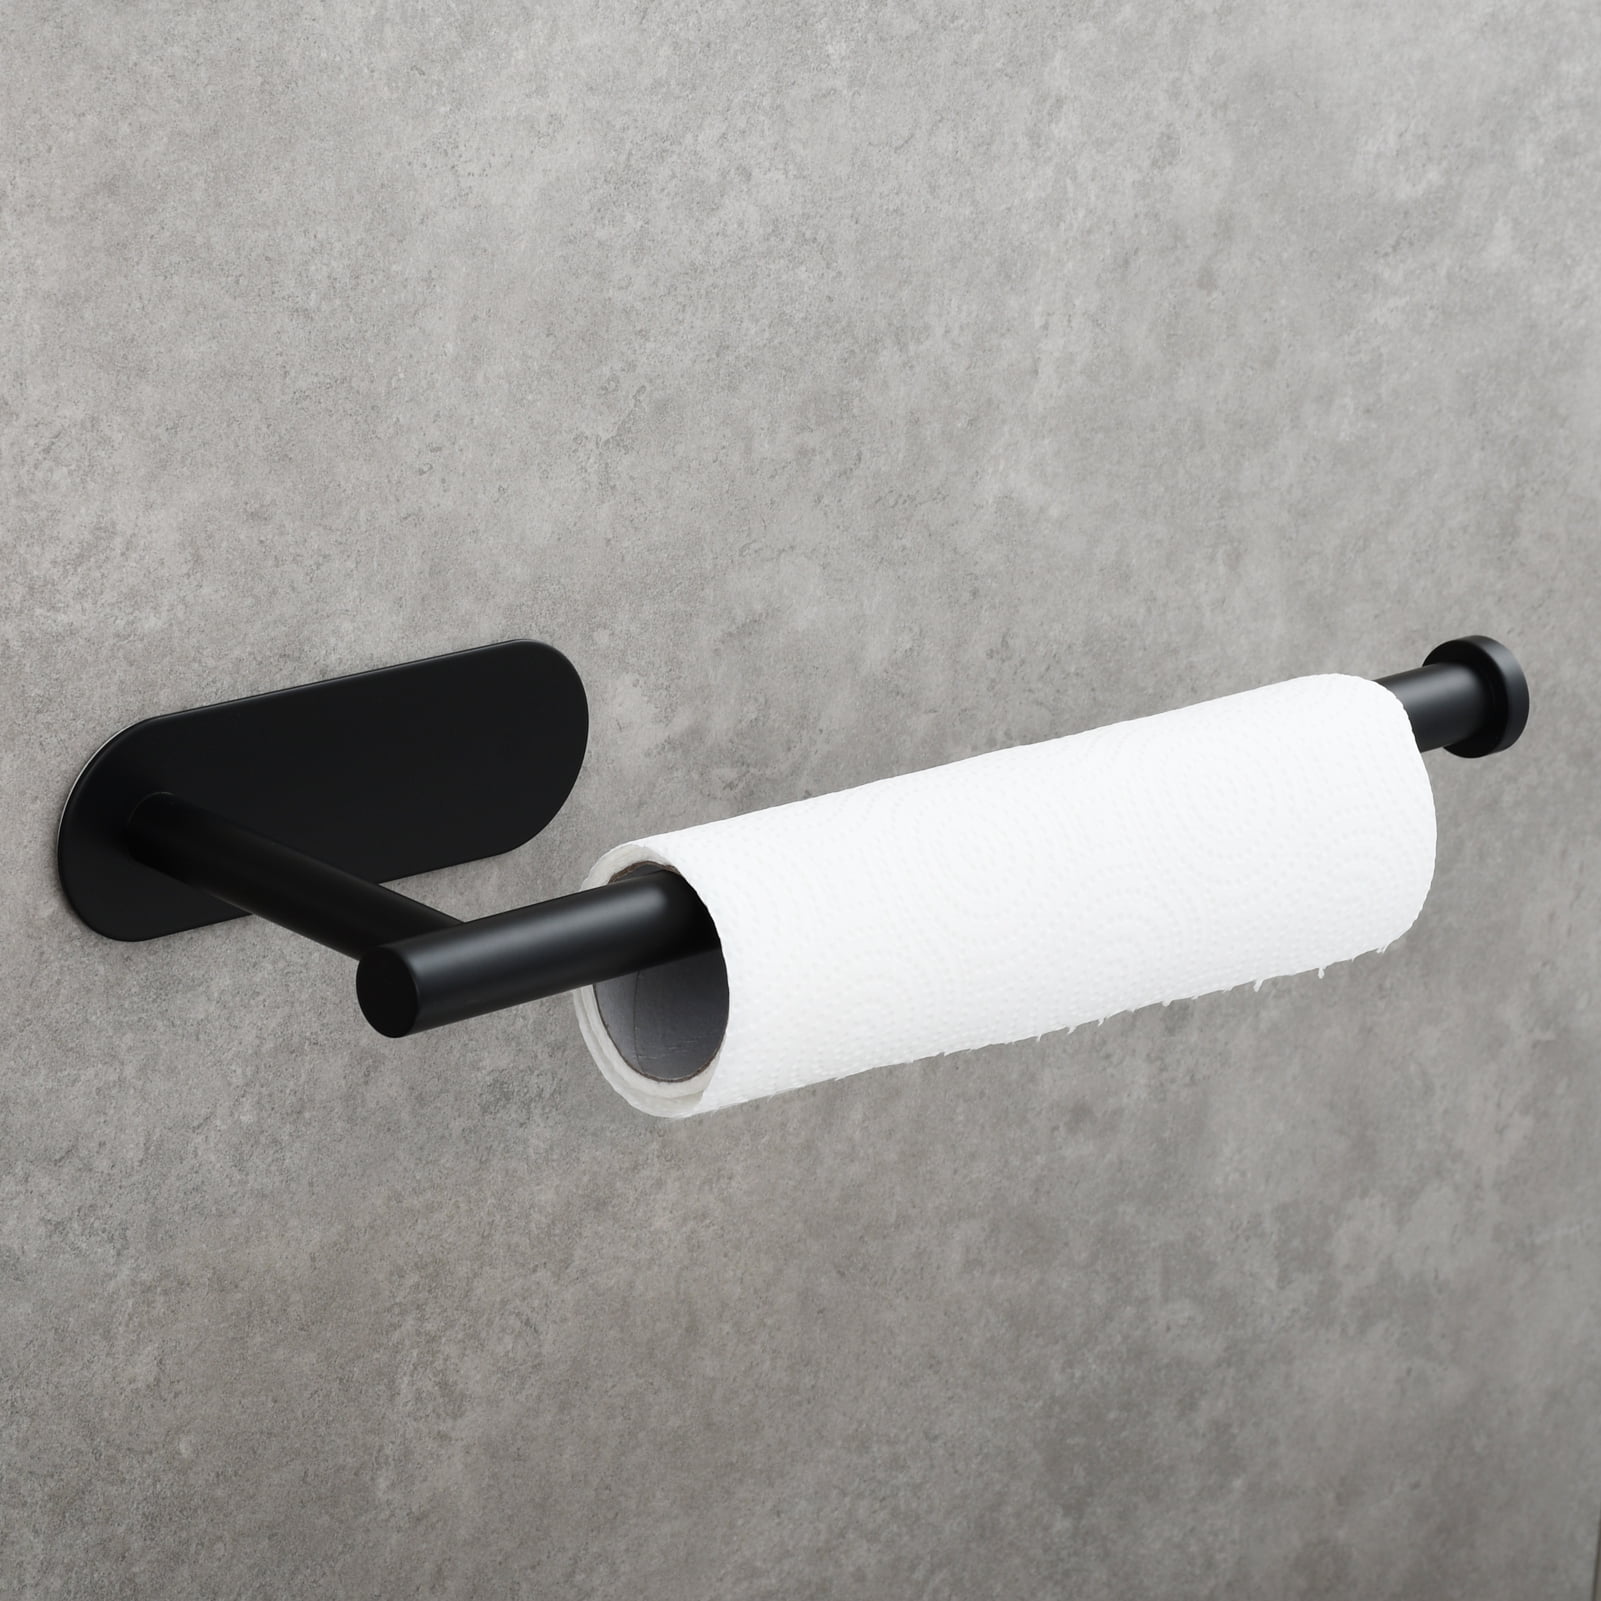 Details about   Paper Towel Dispenser Holder Wall Mount Stainless Steel Tissue Storage Matte New 